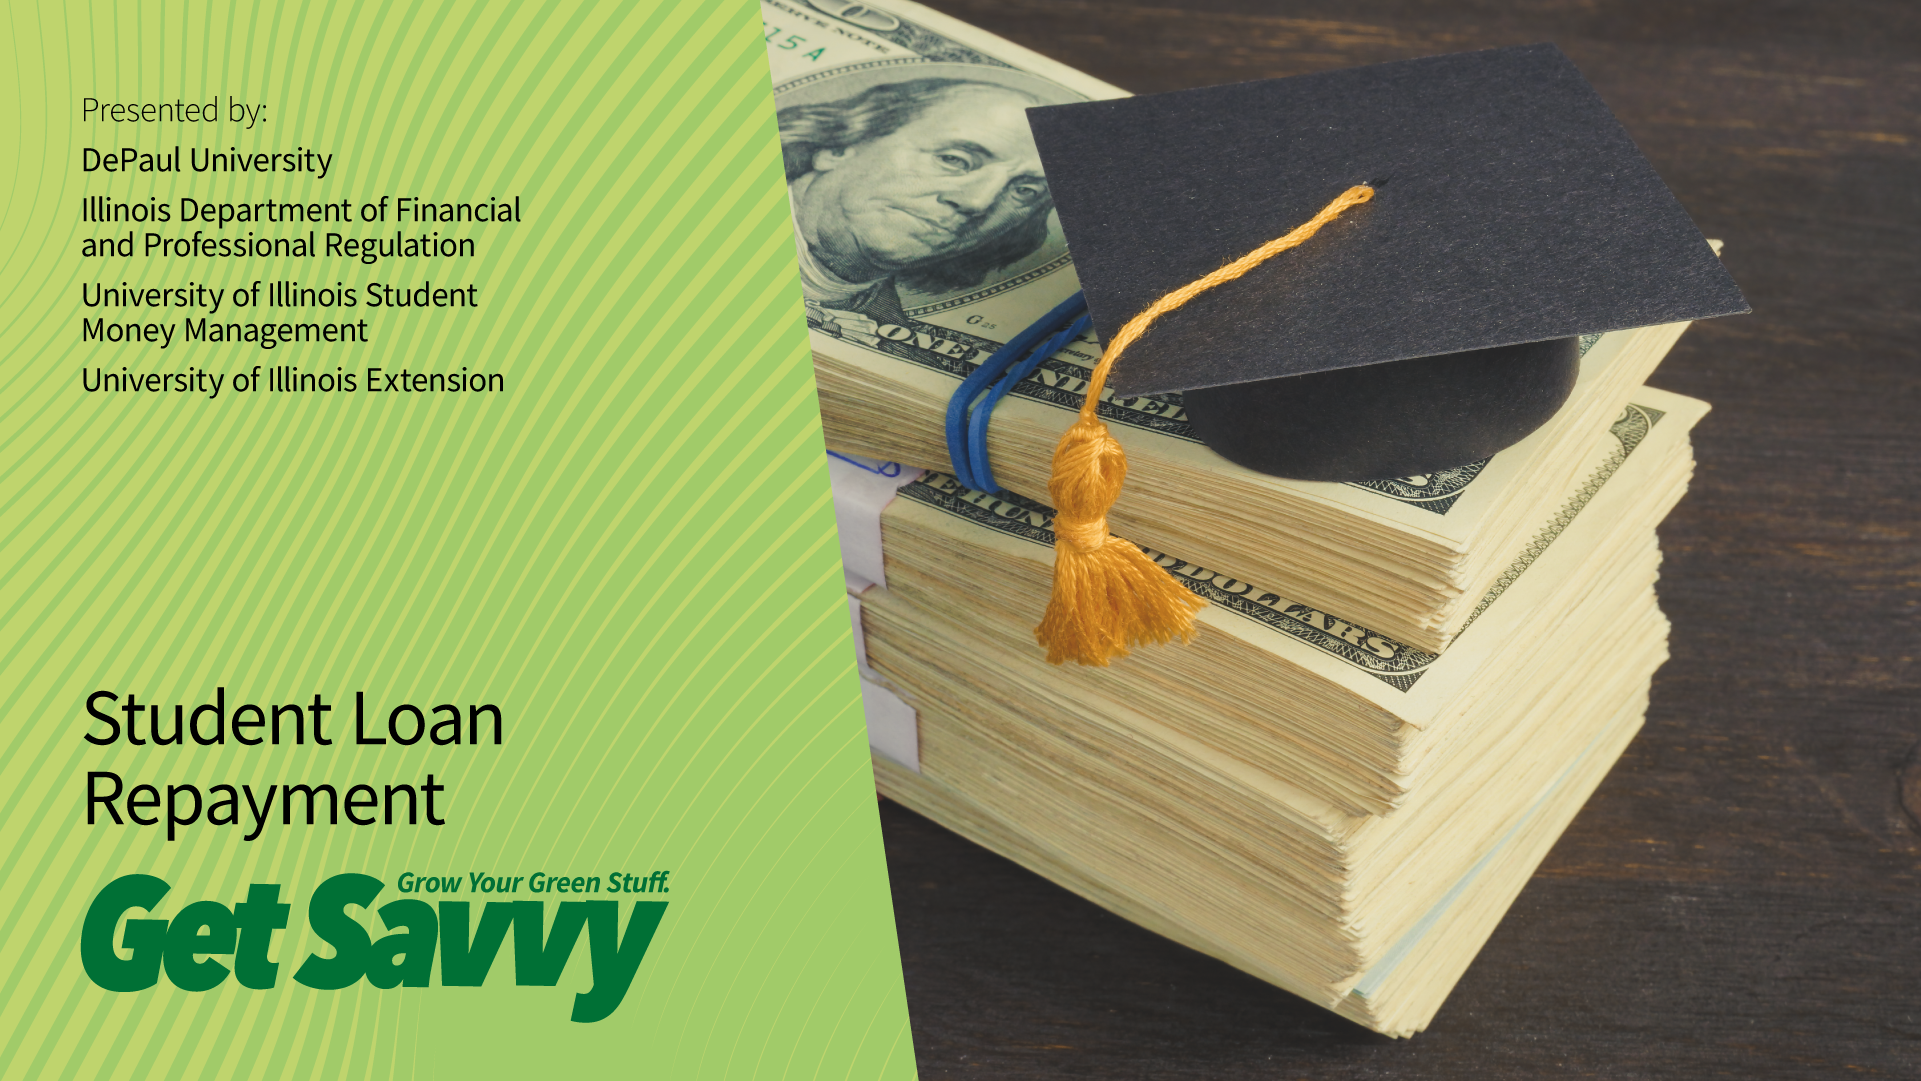 Get Savvy Infographic with money and graduation cap